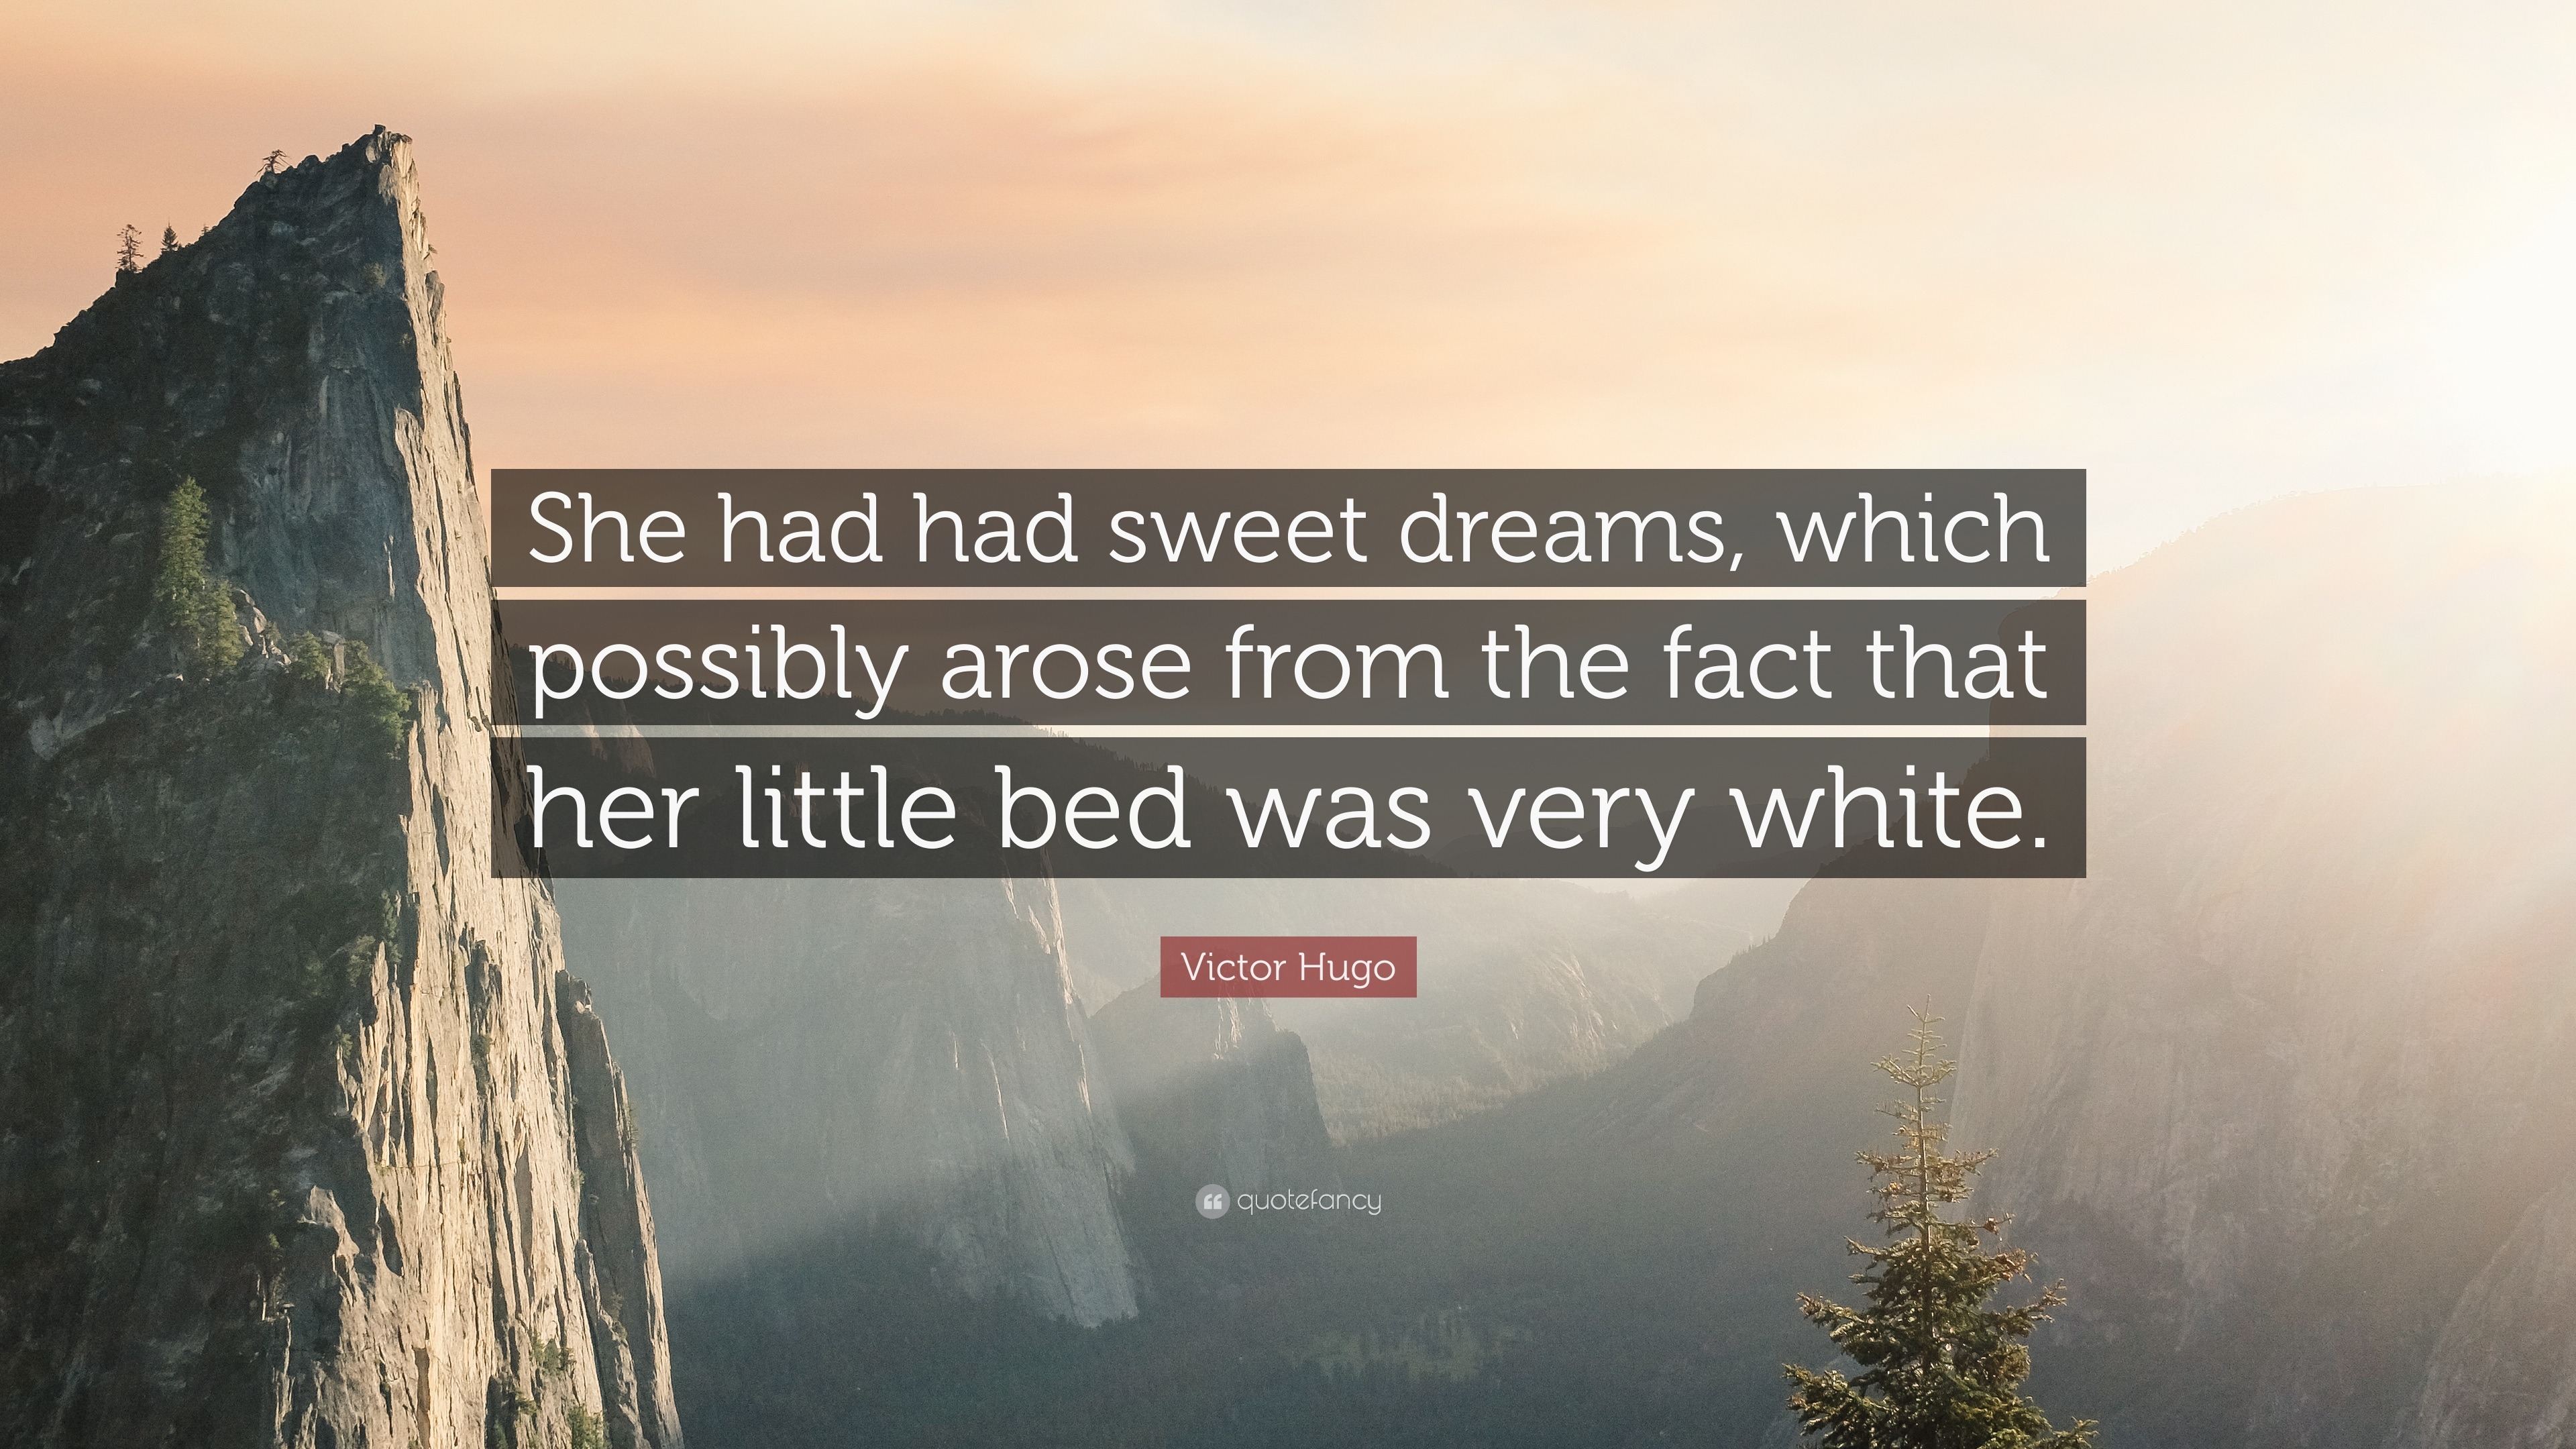 Victor Hugo Quote “she Had Had Sweet Dreams Which Possibly Arose From